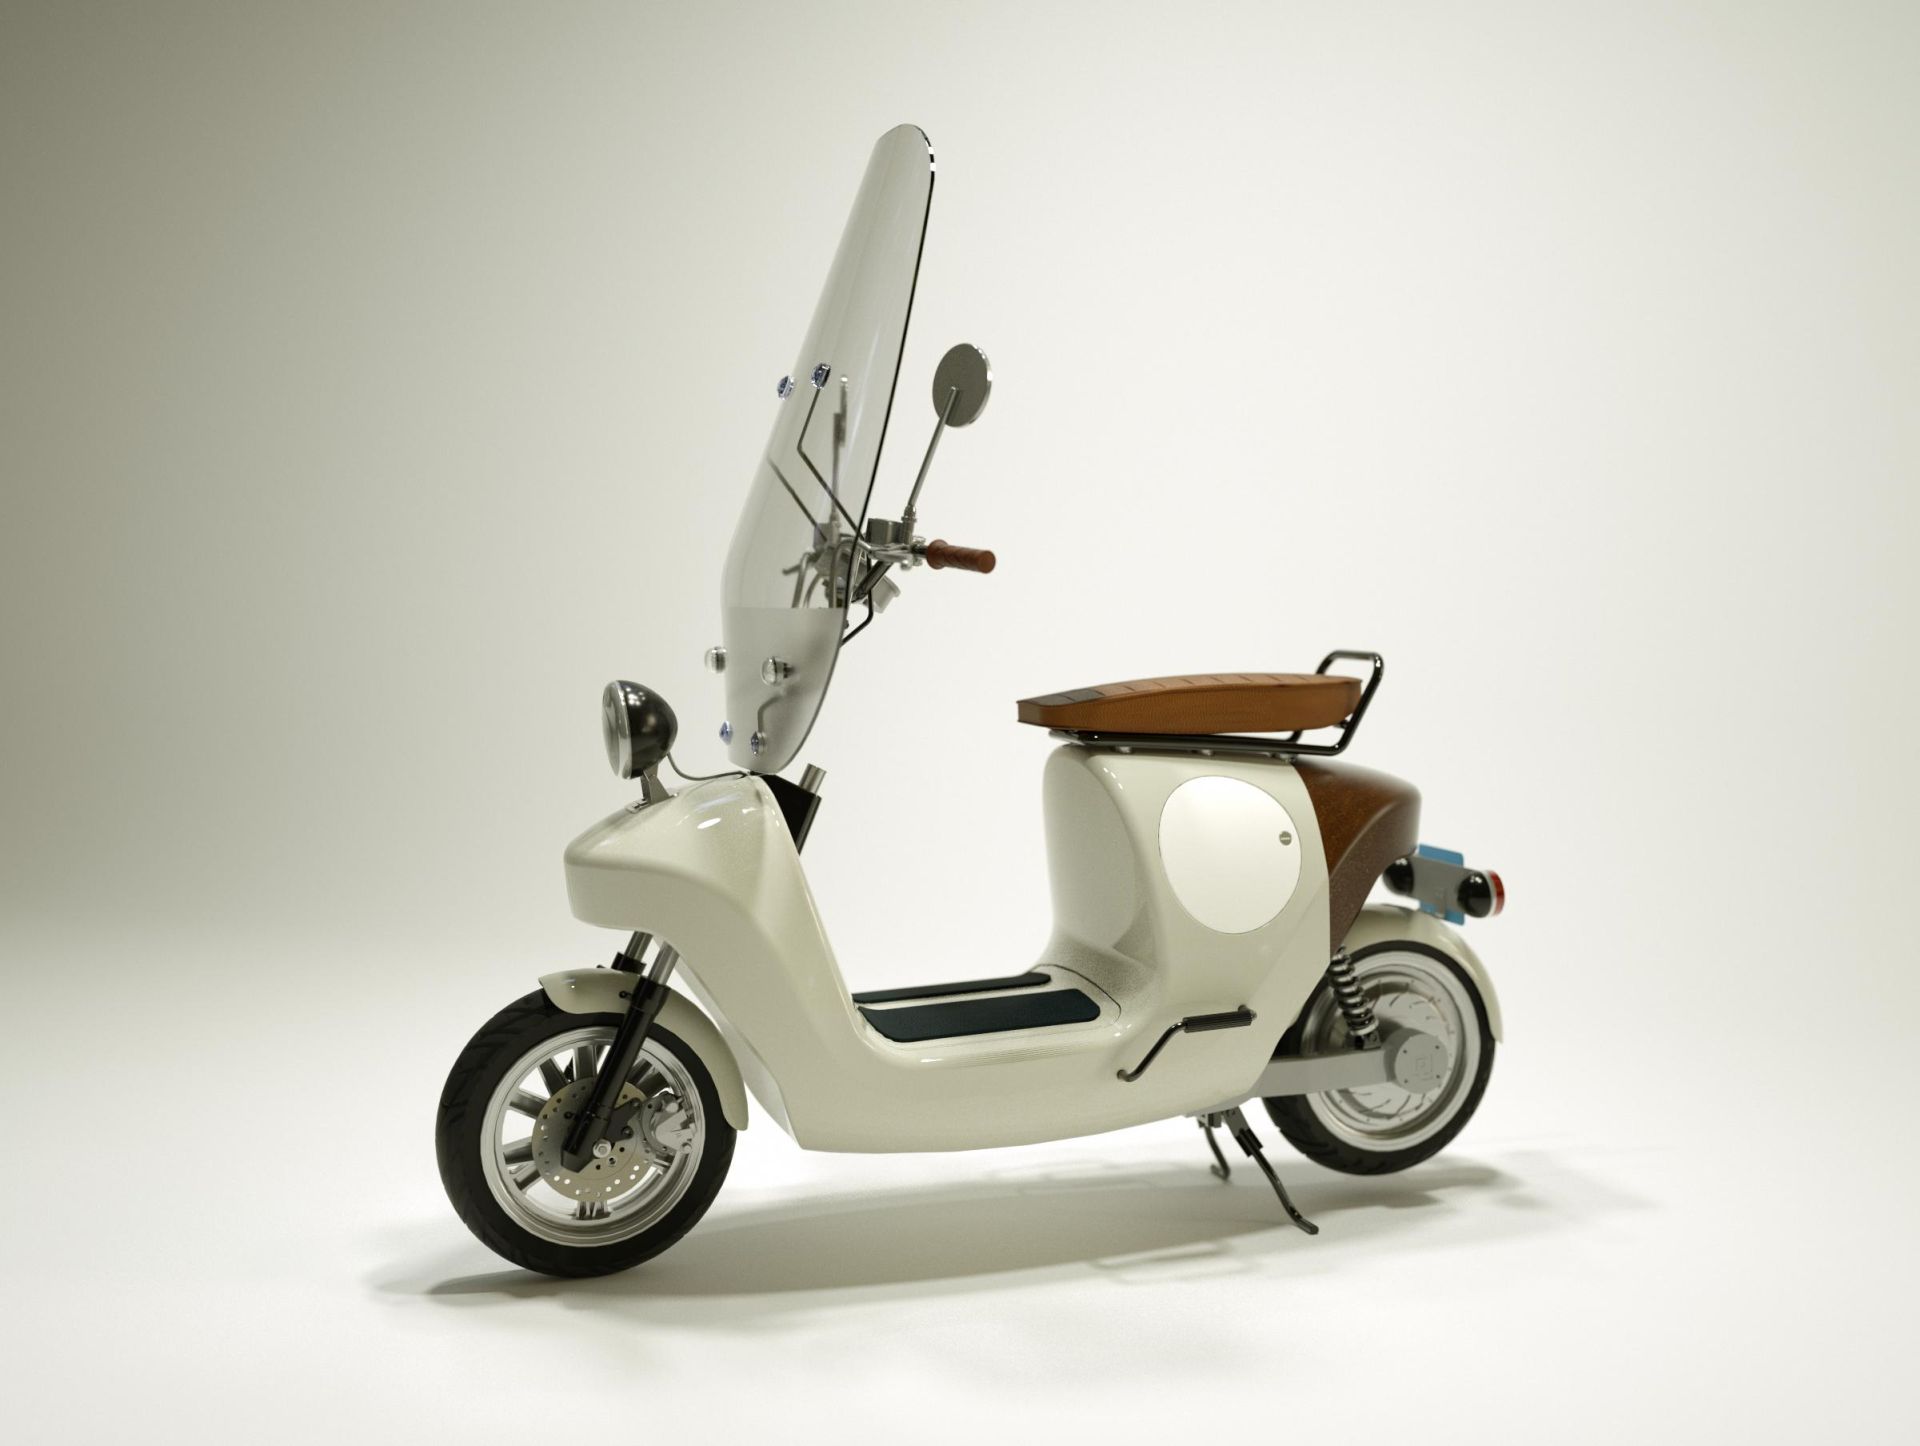 The first fully biodegradable scooter